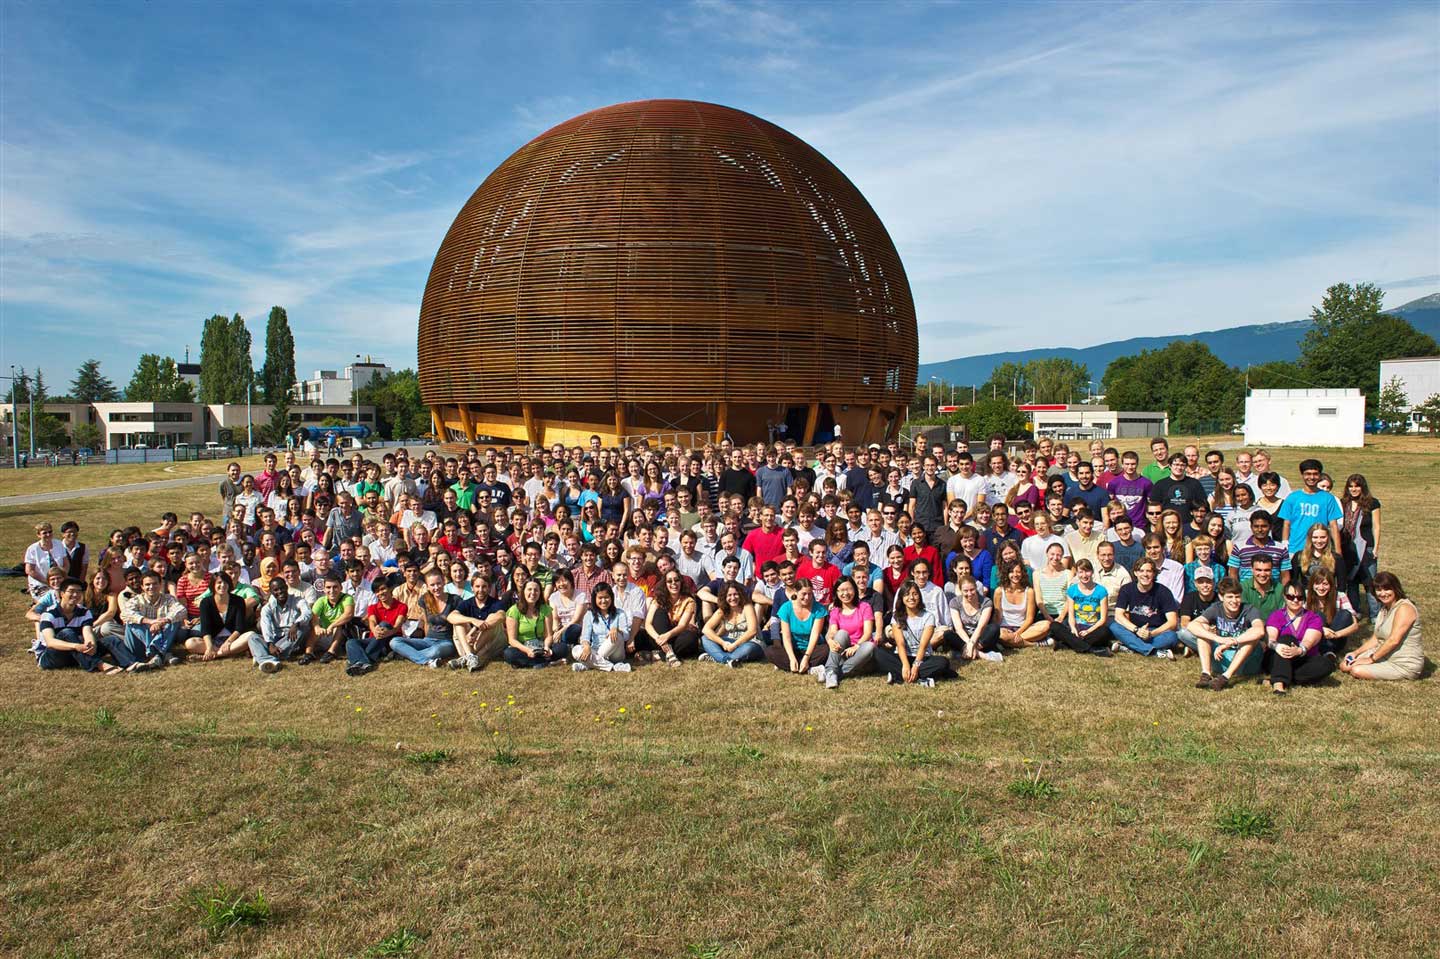 Students! Apply now for CERN's Summer Student Programme